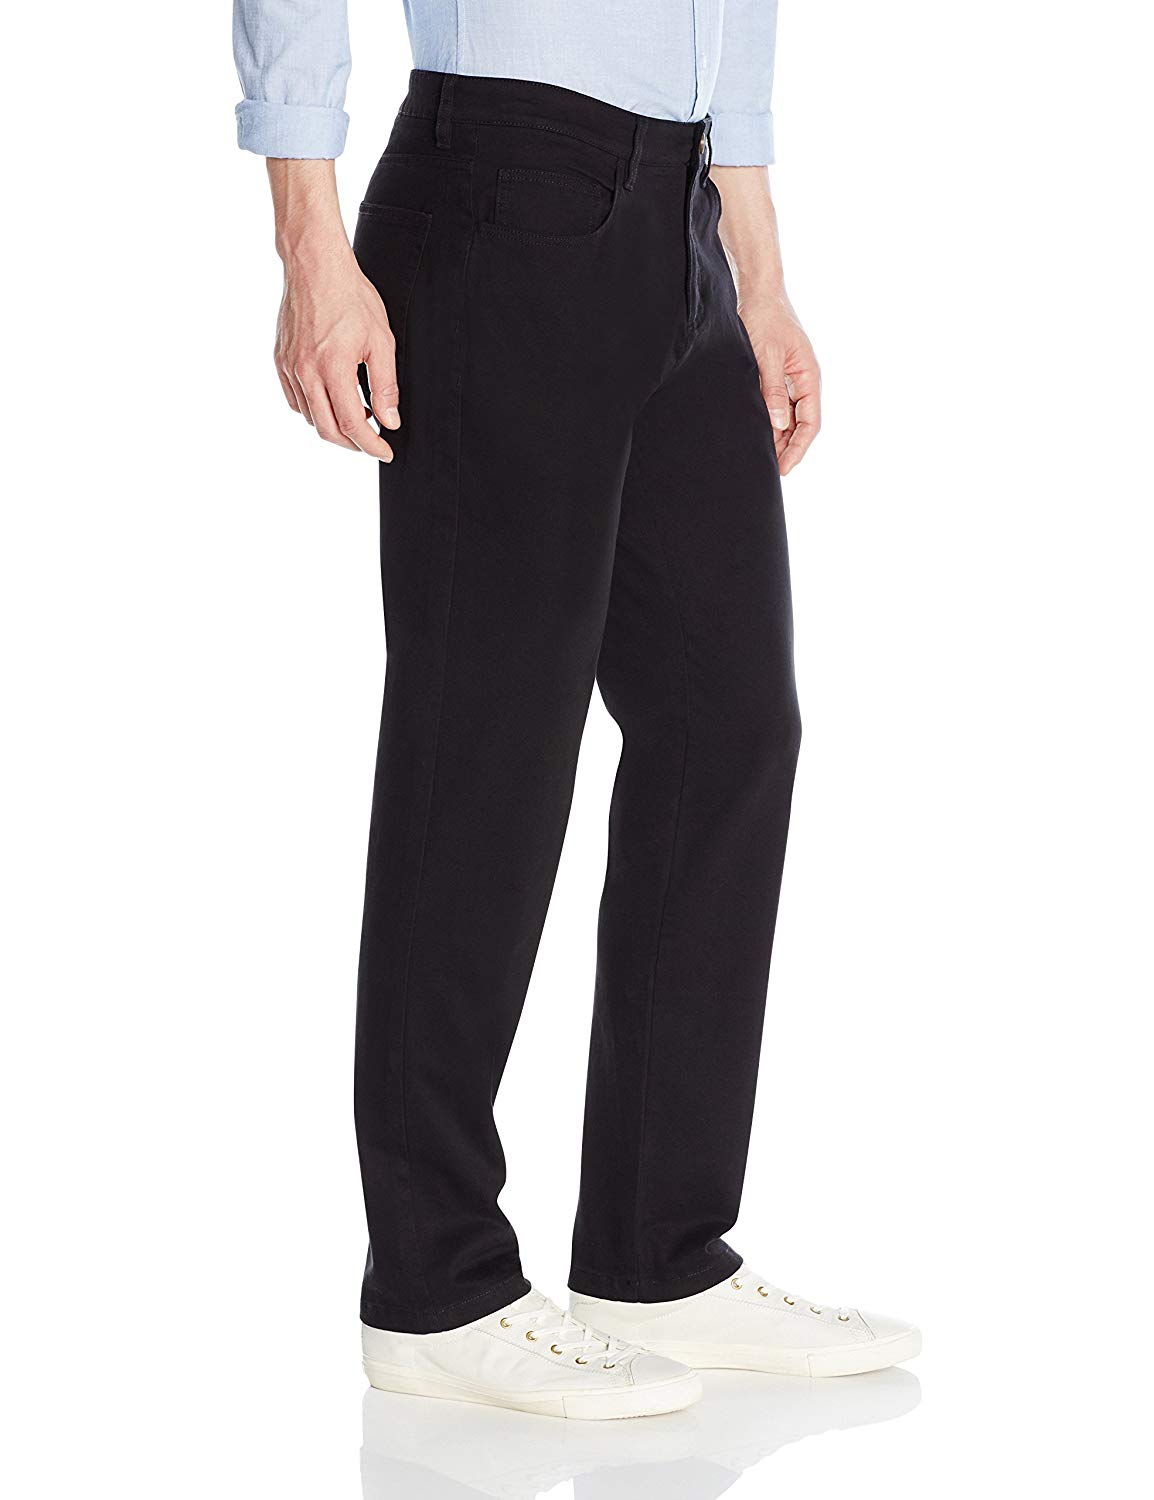 Goodthreads Men's Athletic-Fit 5-Pocket Chino Pant,, Black, Size 33W x ...